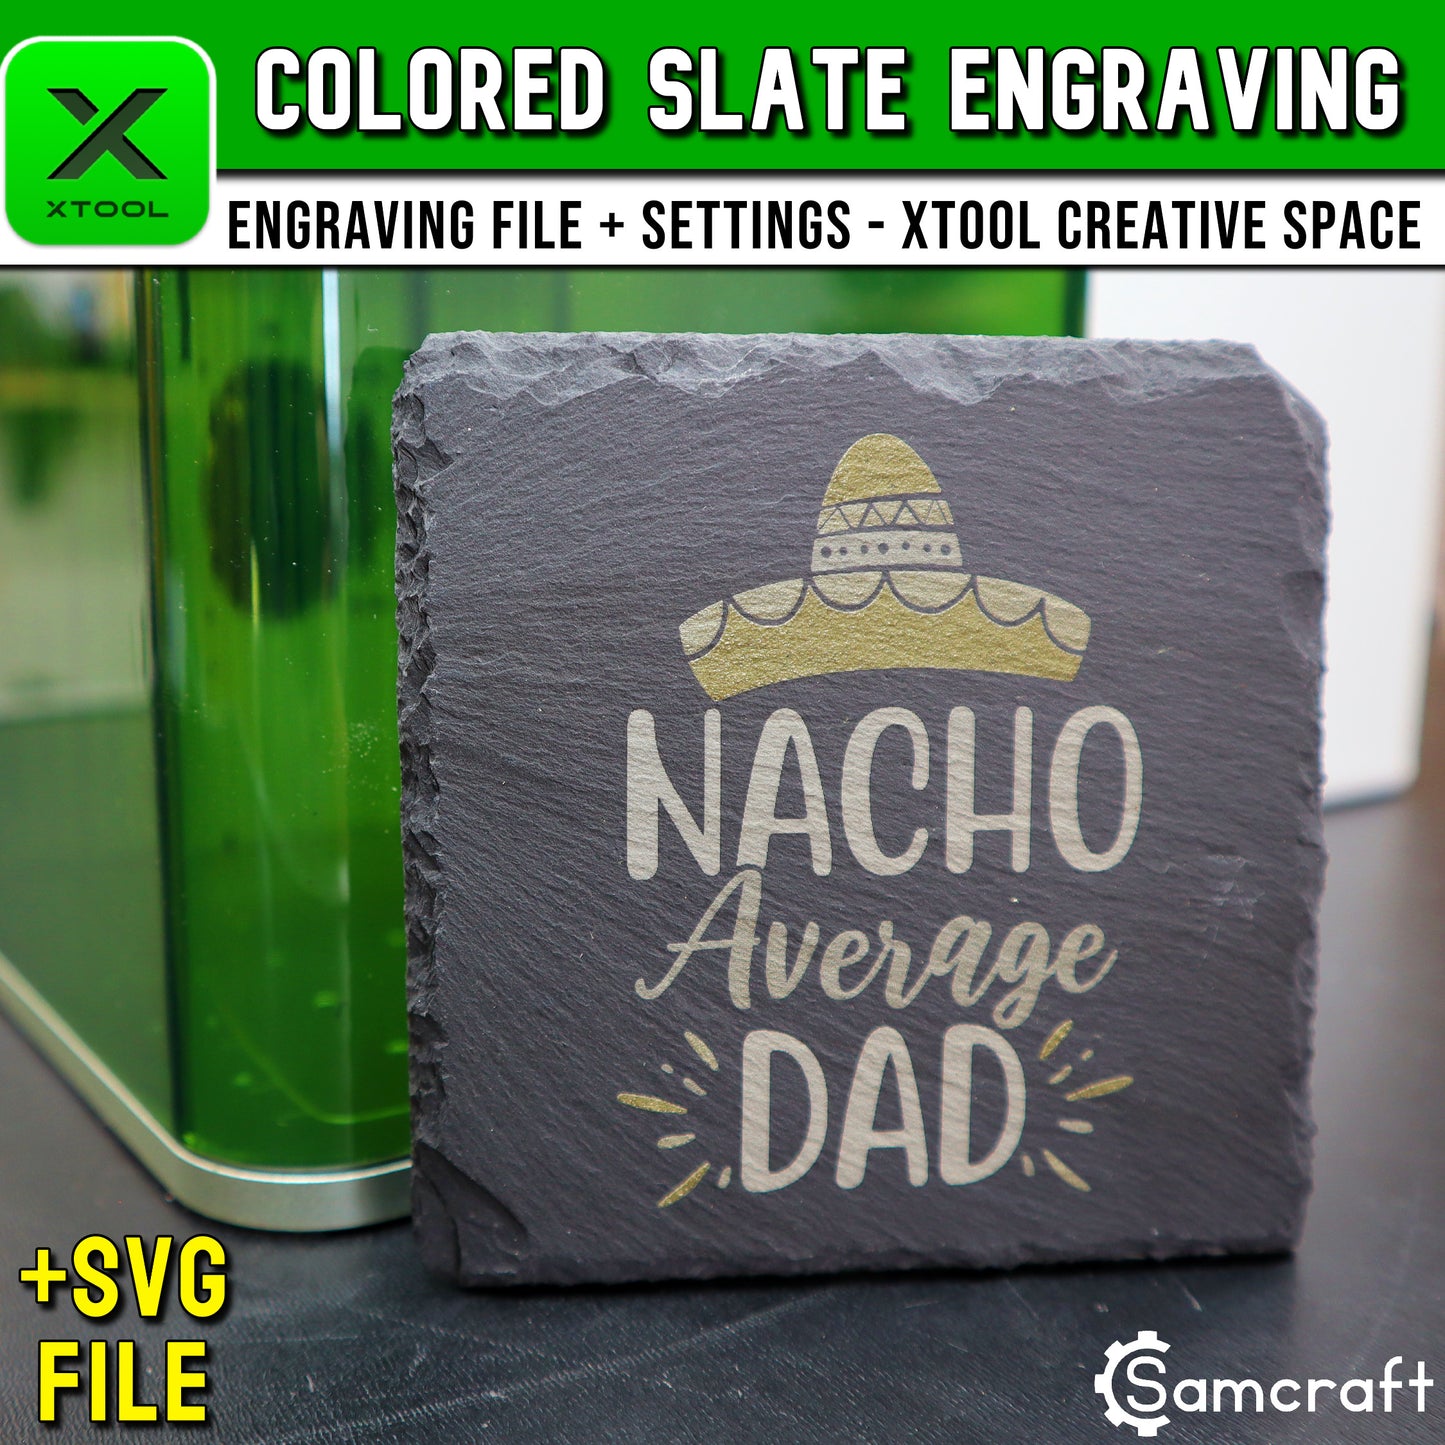 Colored Slate Engraving File - xTool Creative Space